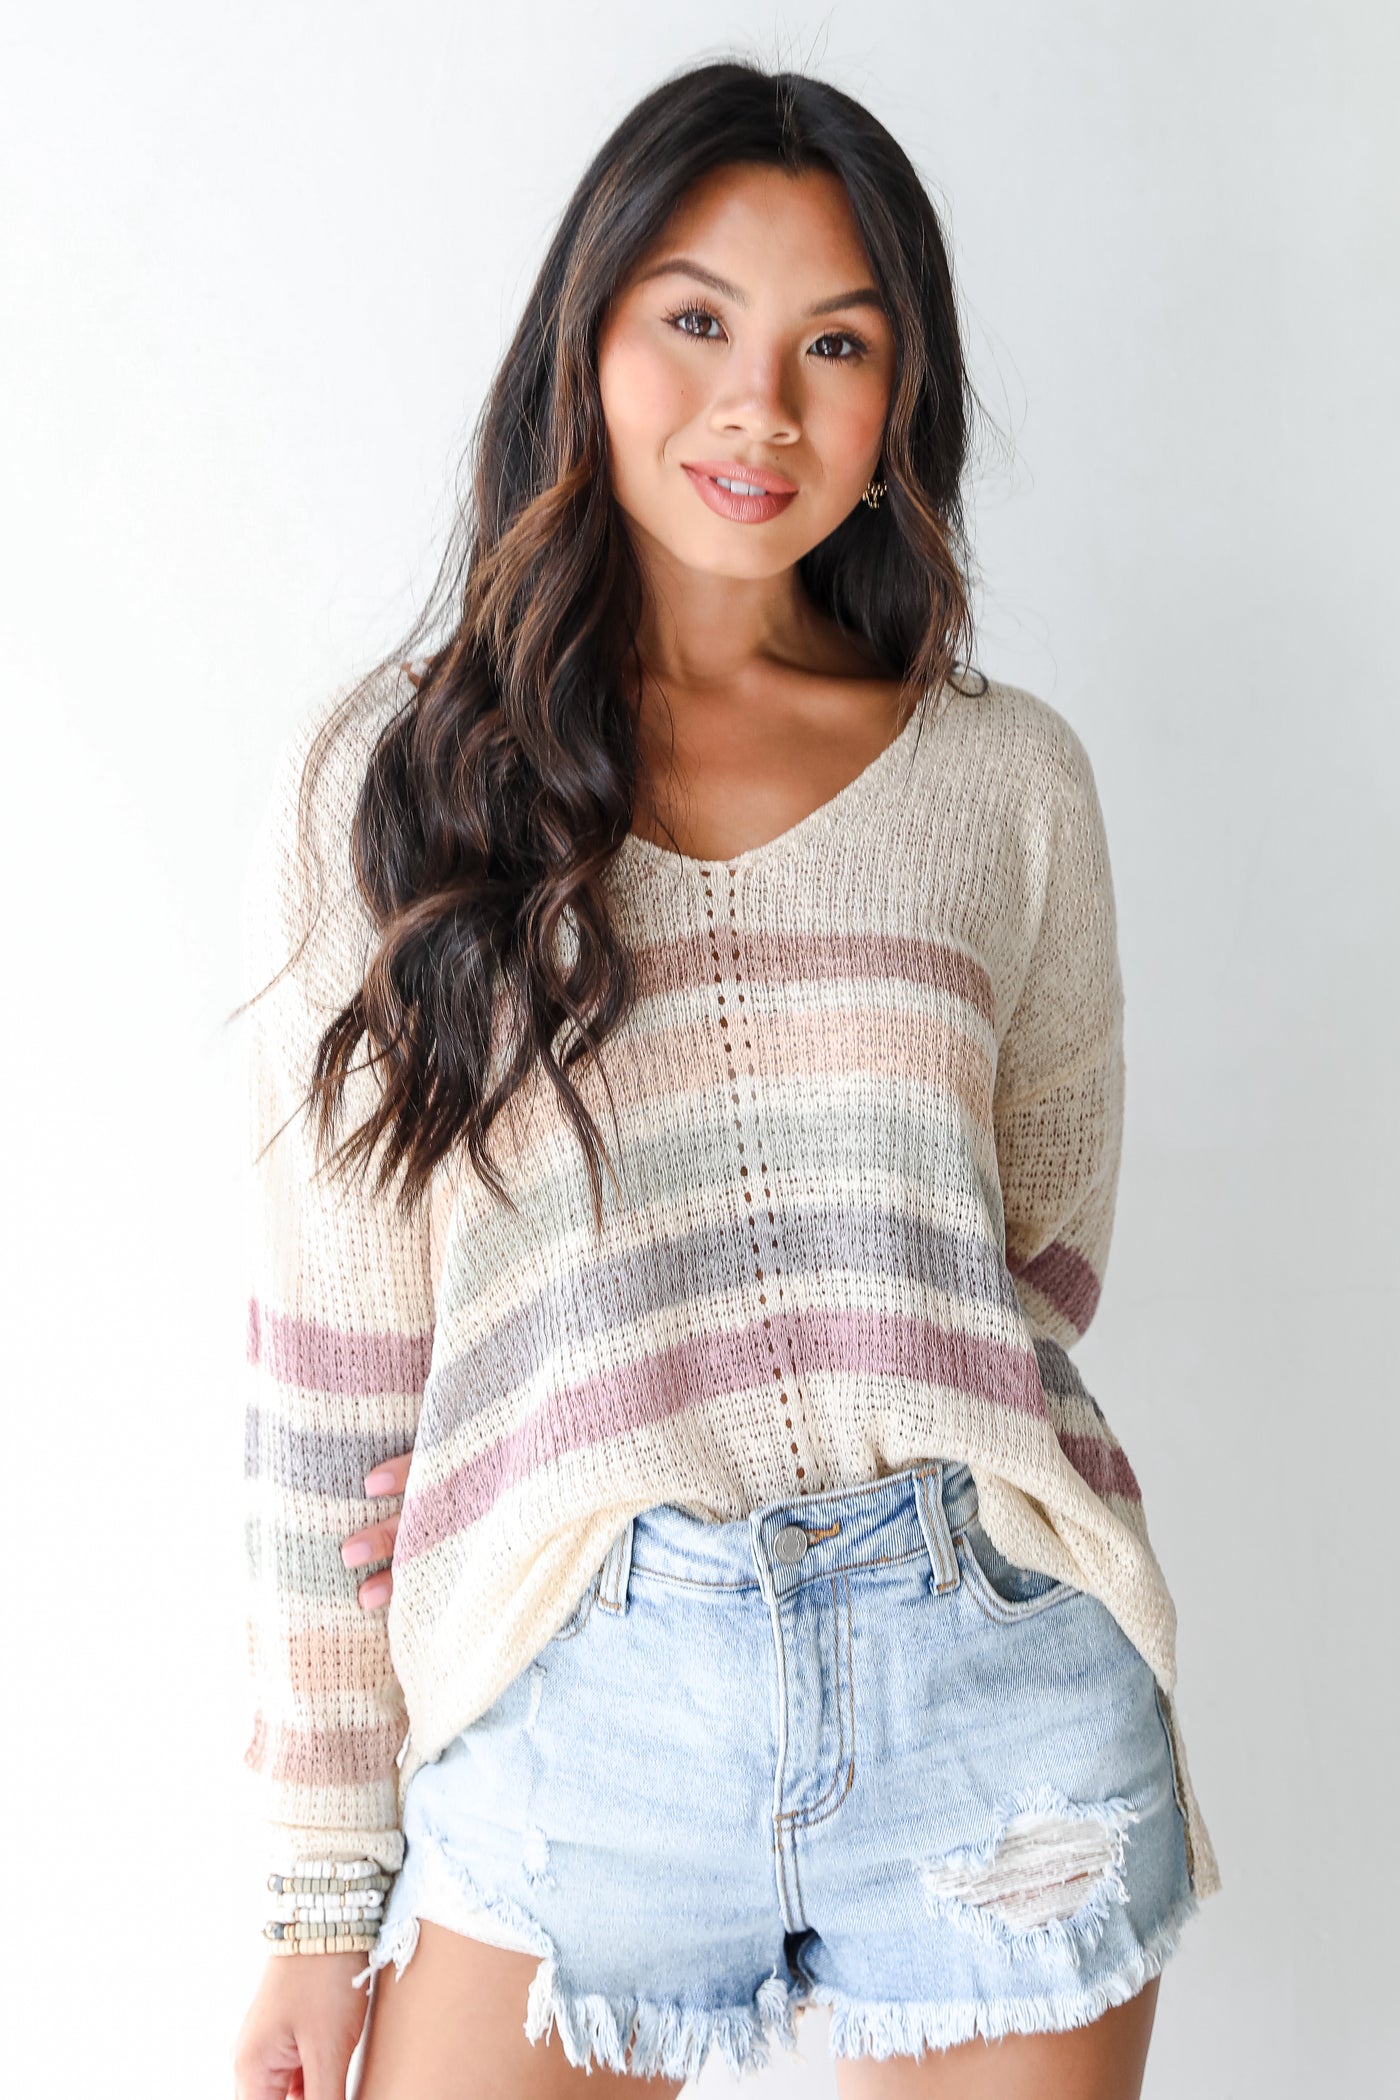 Striped Knit Top front view